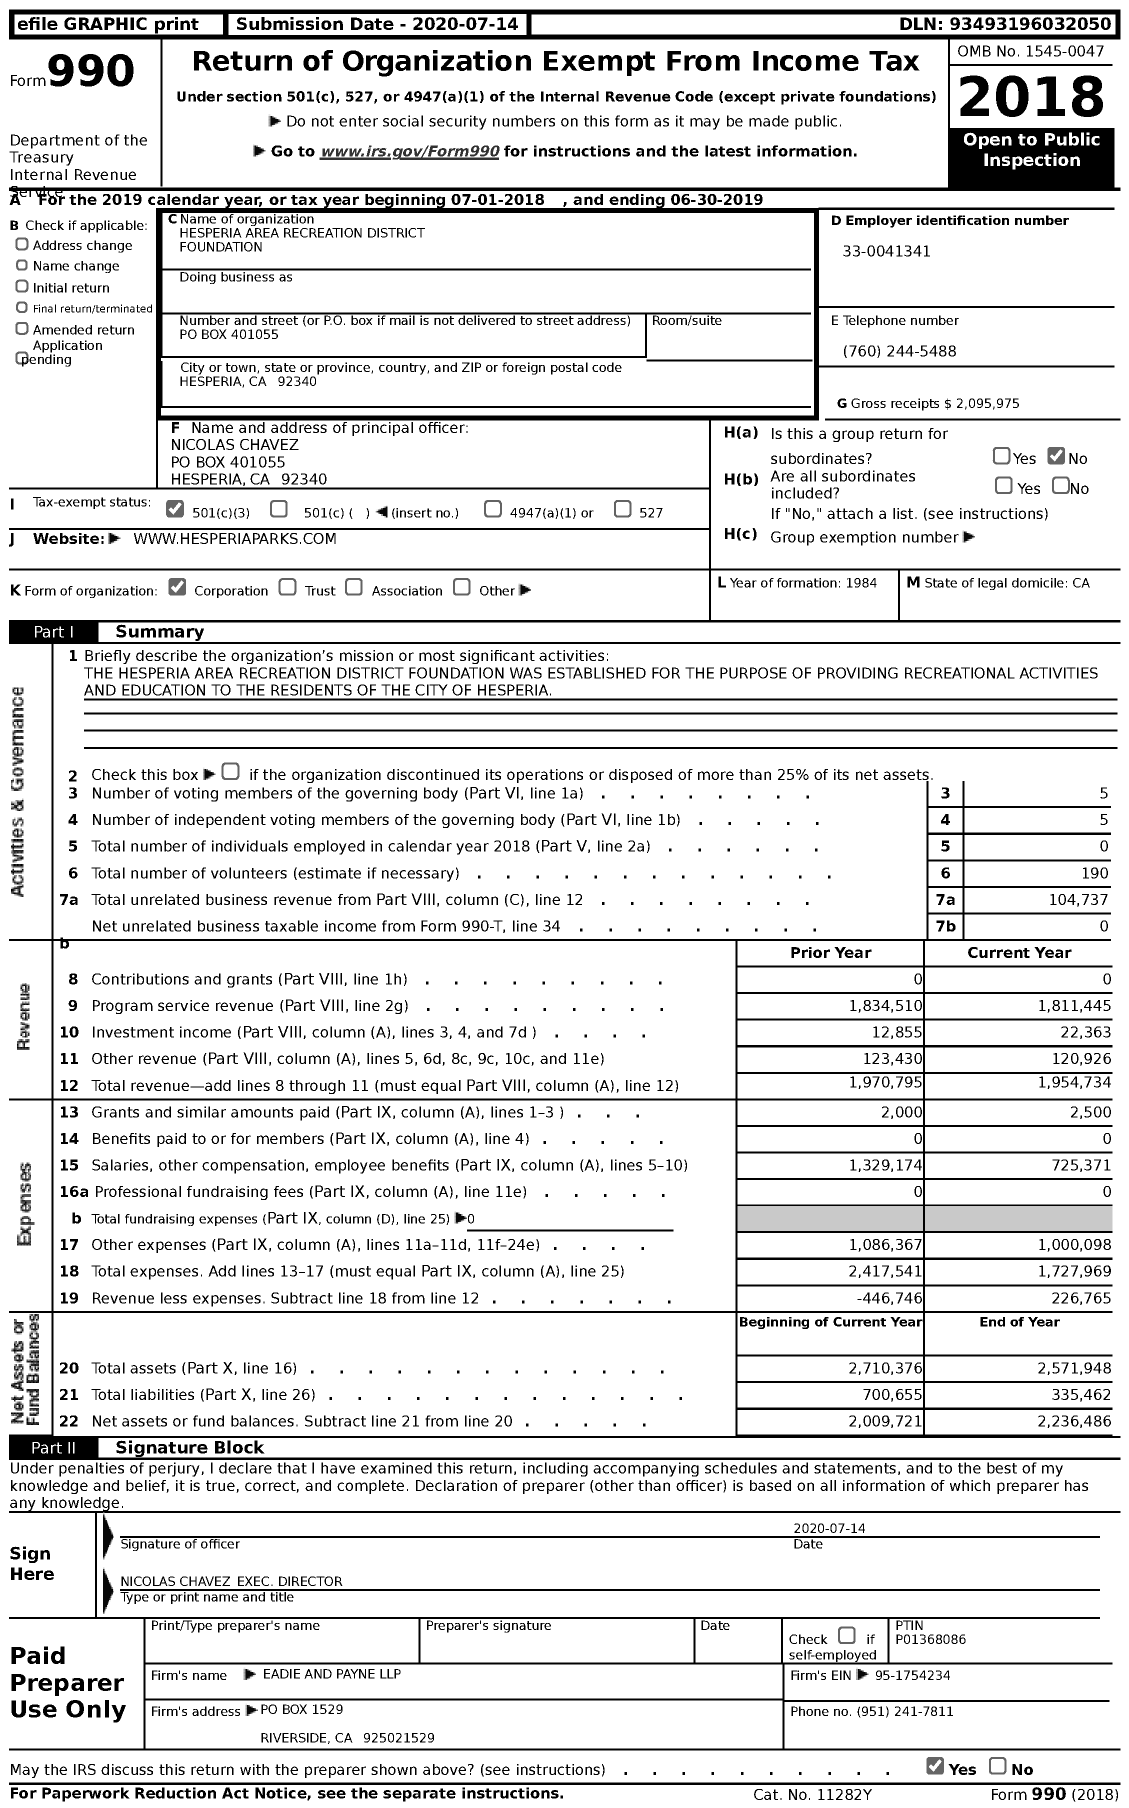 Image of first page of 2018 Form 990 for The Hesperia Area Recreation District Foundation